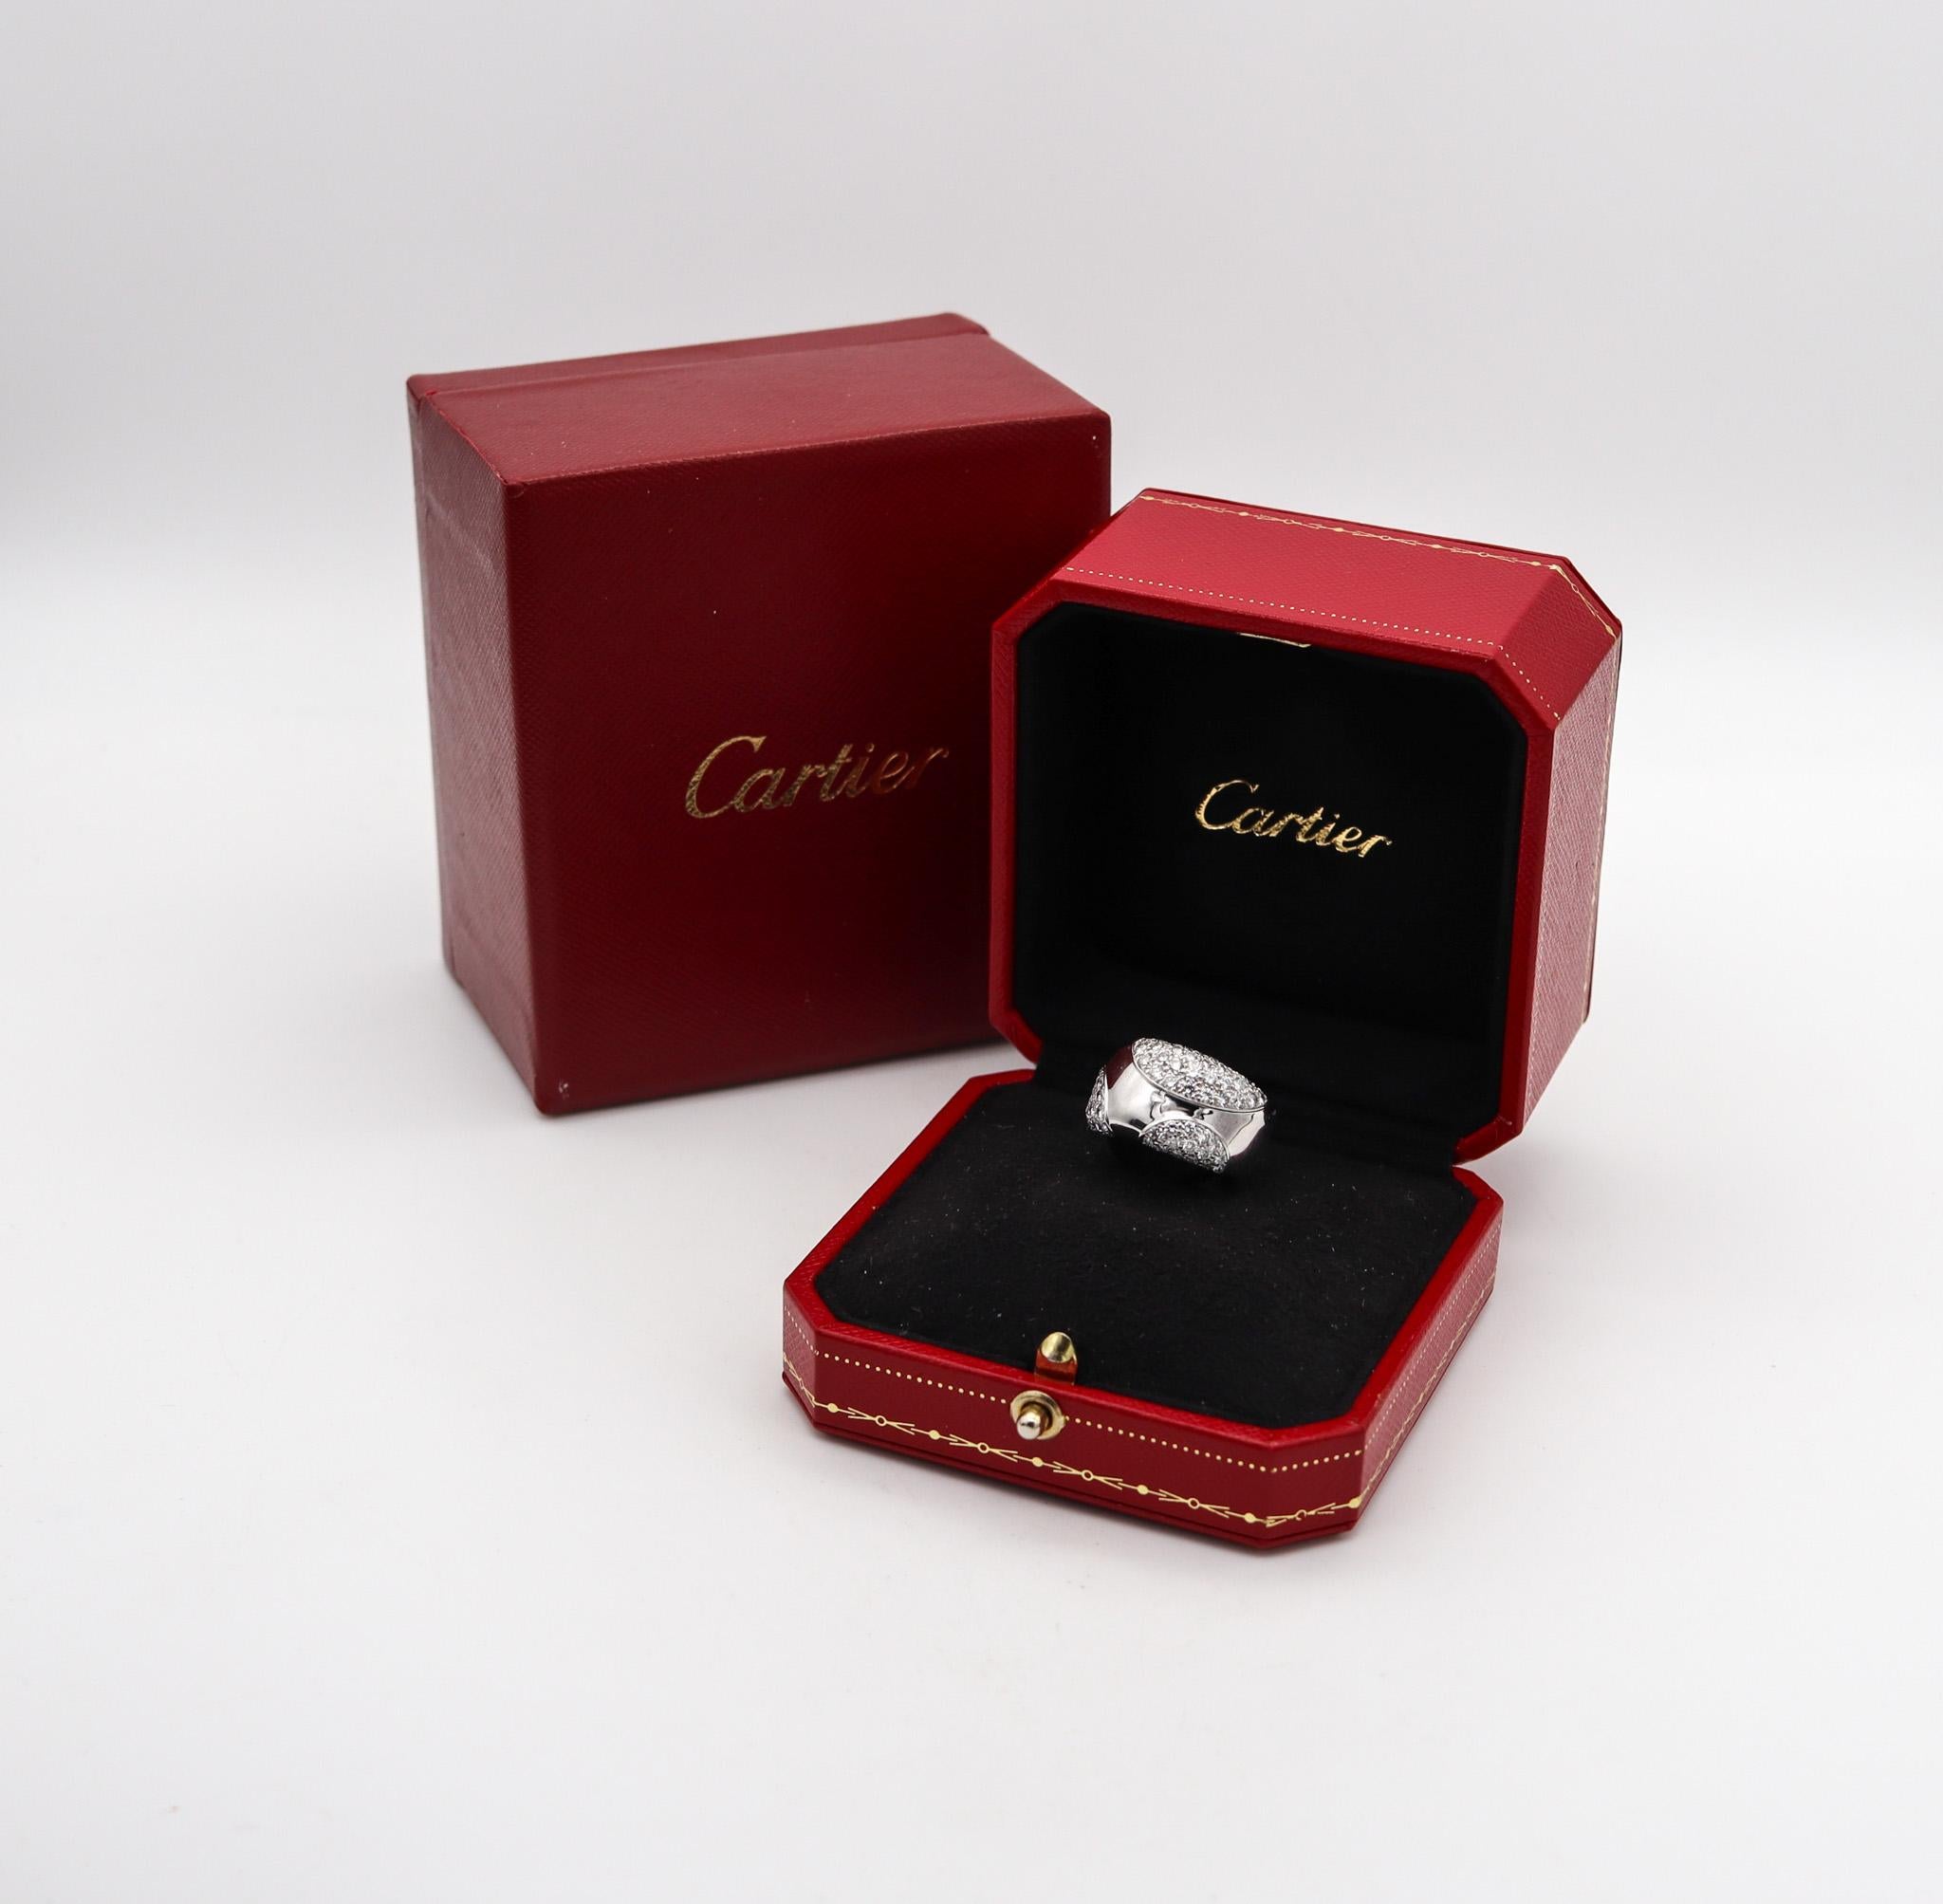 Nouvelle bague ring designed by Cartier.

Beautiful ring, created in Paris France by the jewelry house of Cartier. This rare ring is part of the iconic Nouvelle Bague collection and was crafted in solid white gold of 18 karats with high polished